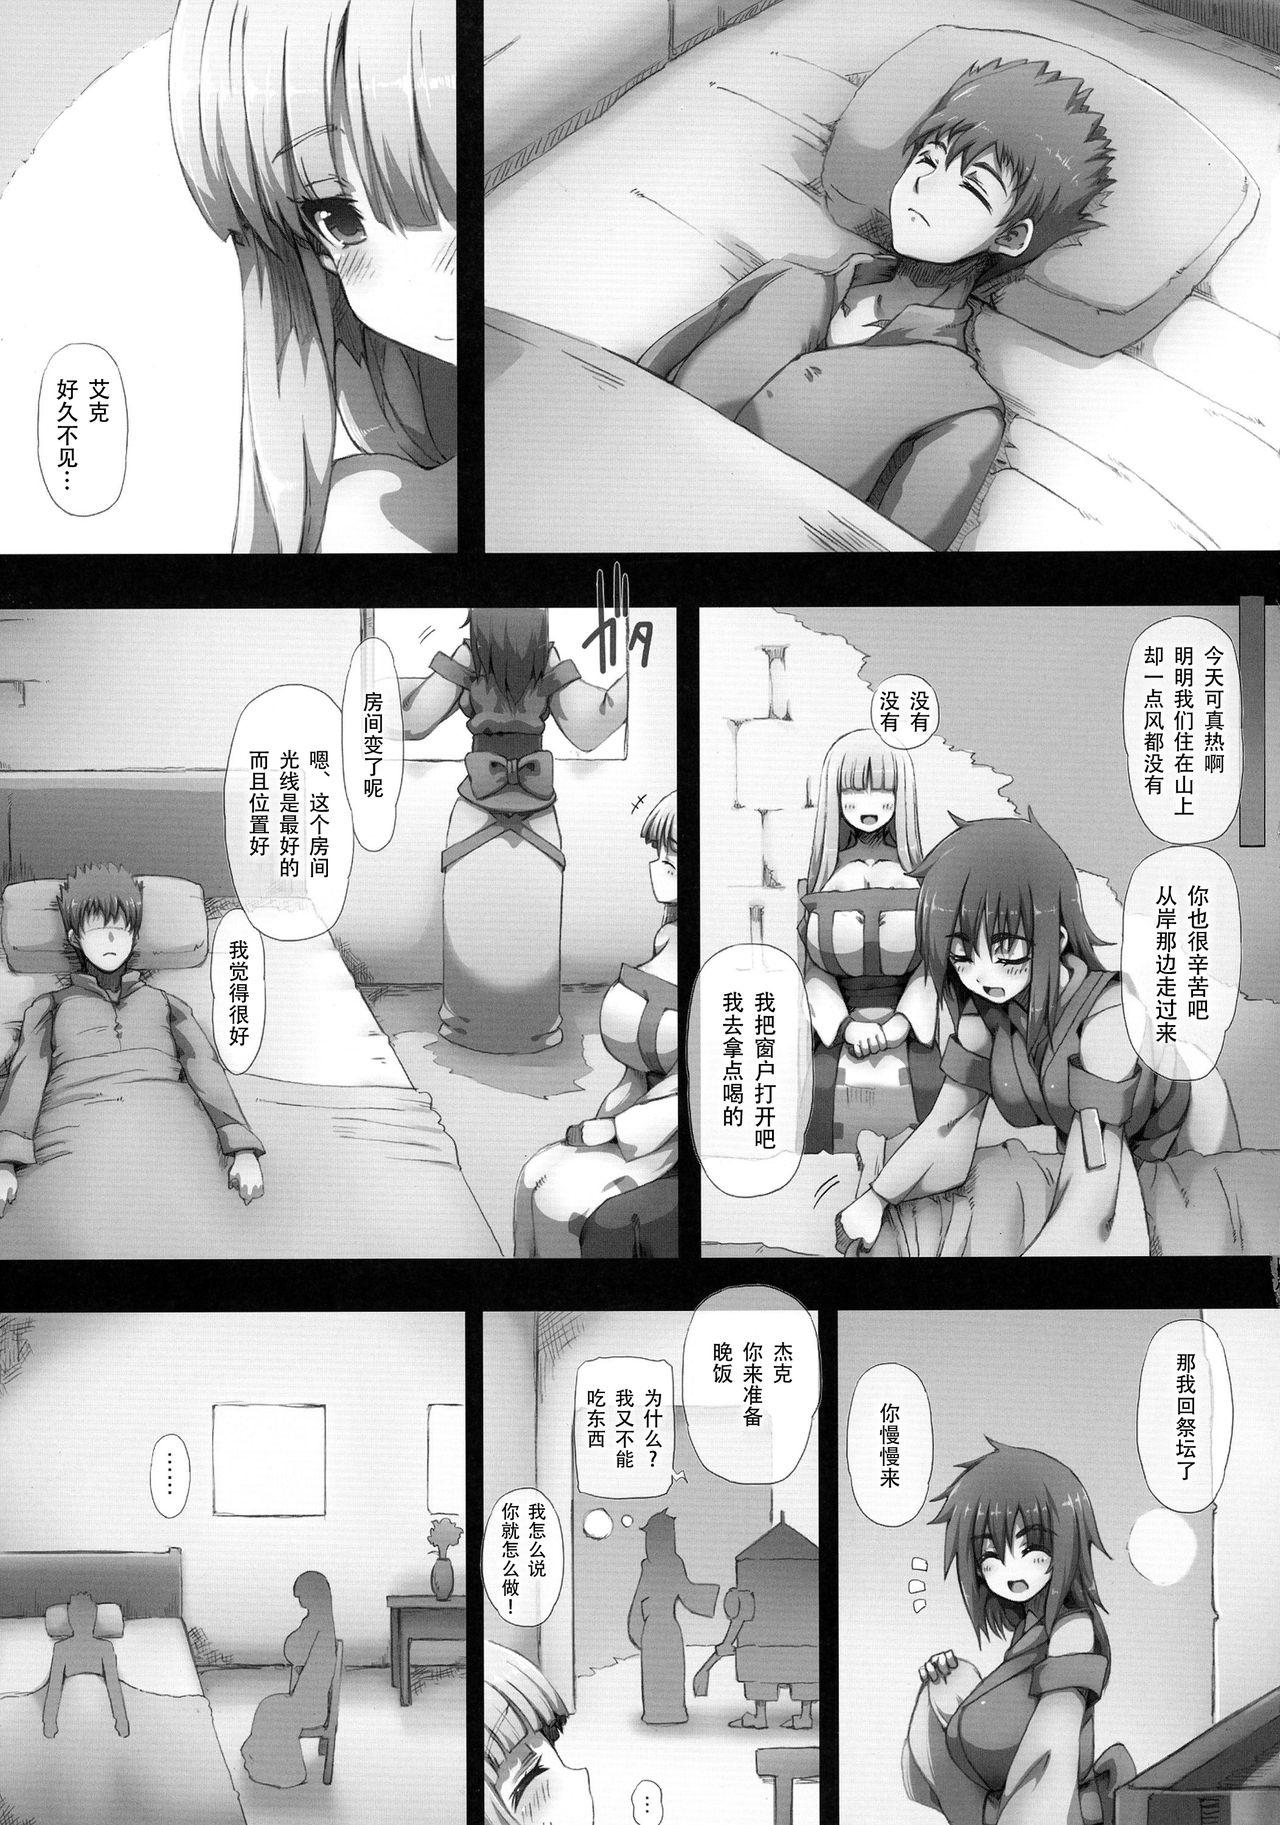 Toes [GREAT Acta (tokyo)] Lieza Origin (Arc The Lad)[Chinese]【不可视汉化】 - Arc the lad Hardcore - Page 10